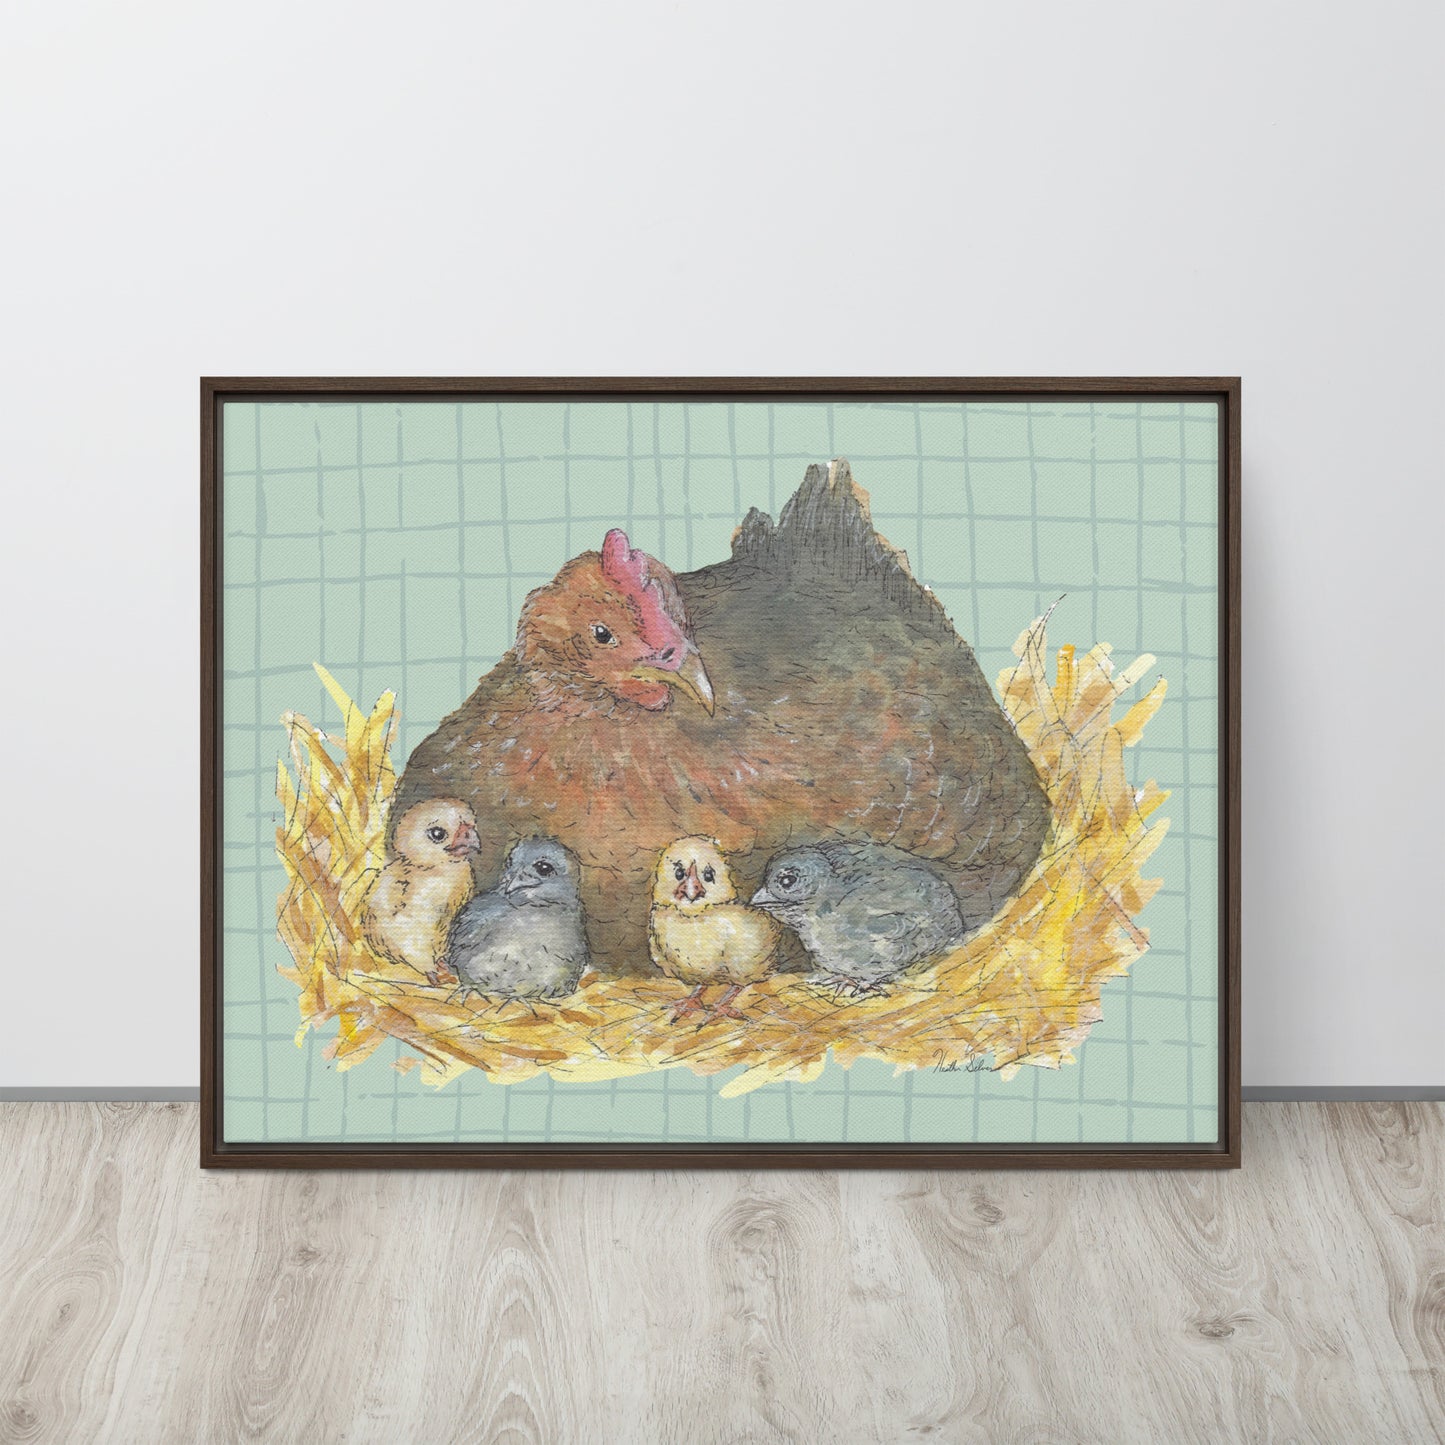 24 by 32 inch Mother Hen Floating Frame Canvas Wall Art. Heather Silver's watercolor painting, Mother Hen, with a green crosshatched background, printed on a stretched canvas and framed with a dark brown pine frame. Shown leaning against wall.